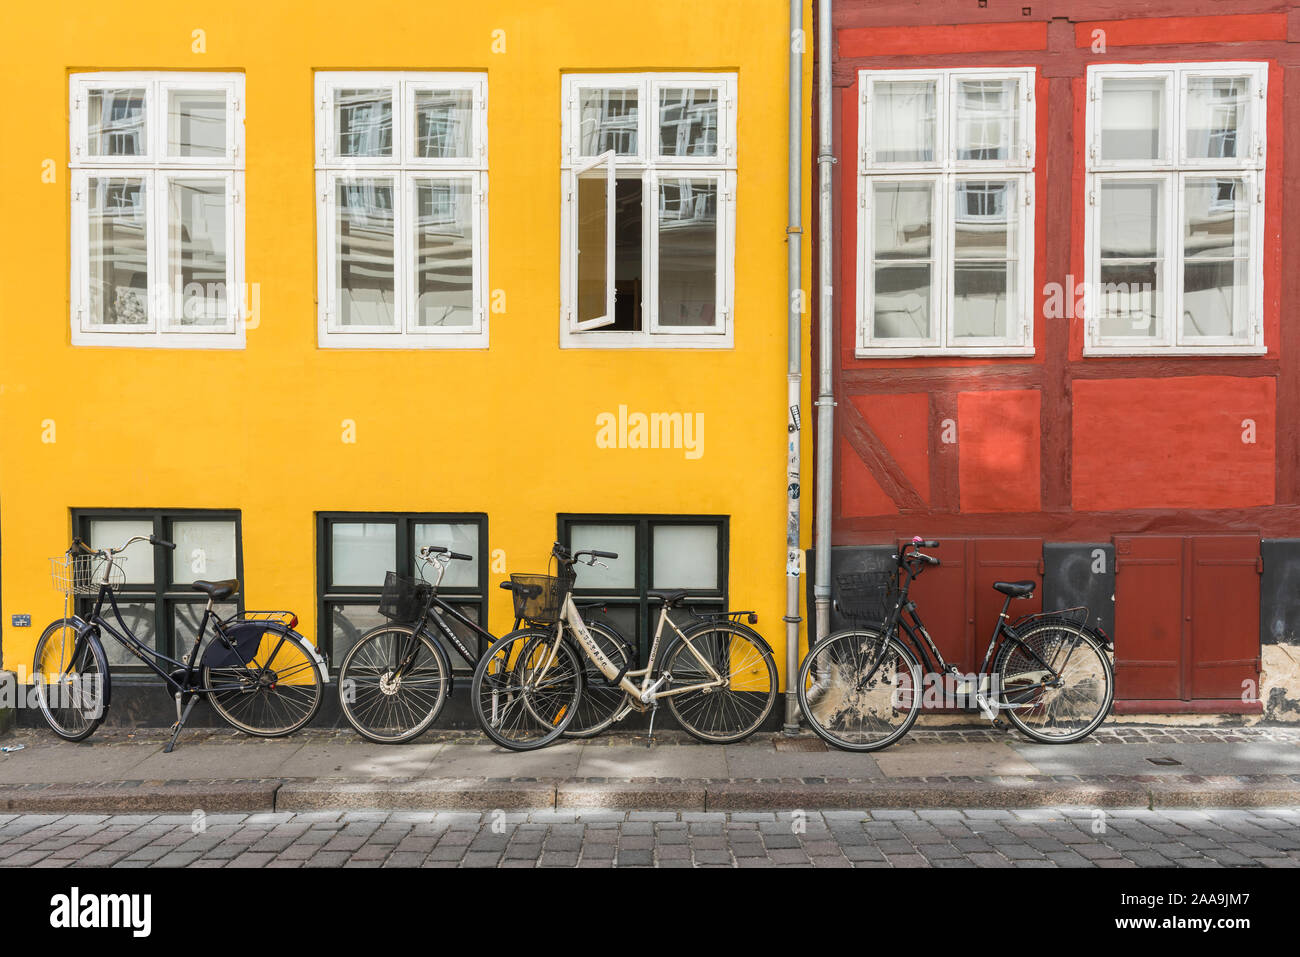 Denmark bicycle, view of bicycles parked against colorful period buildings in the Old Town district of central Copenhagen, Denmark. Stock Photo